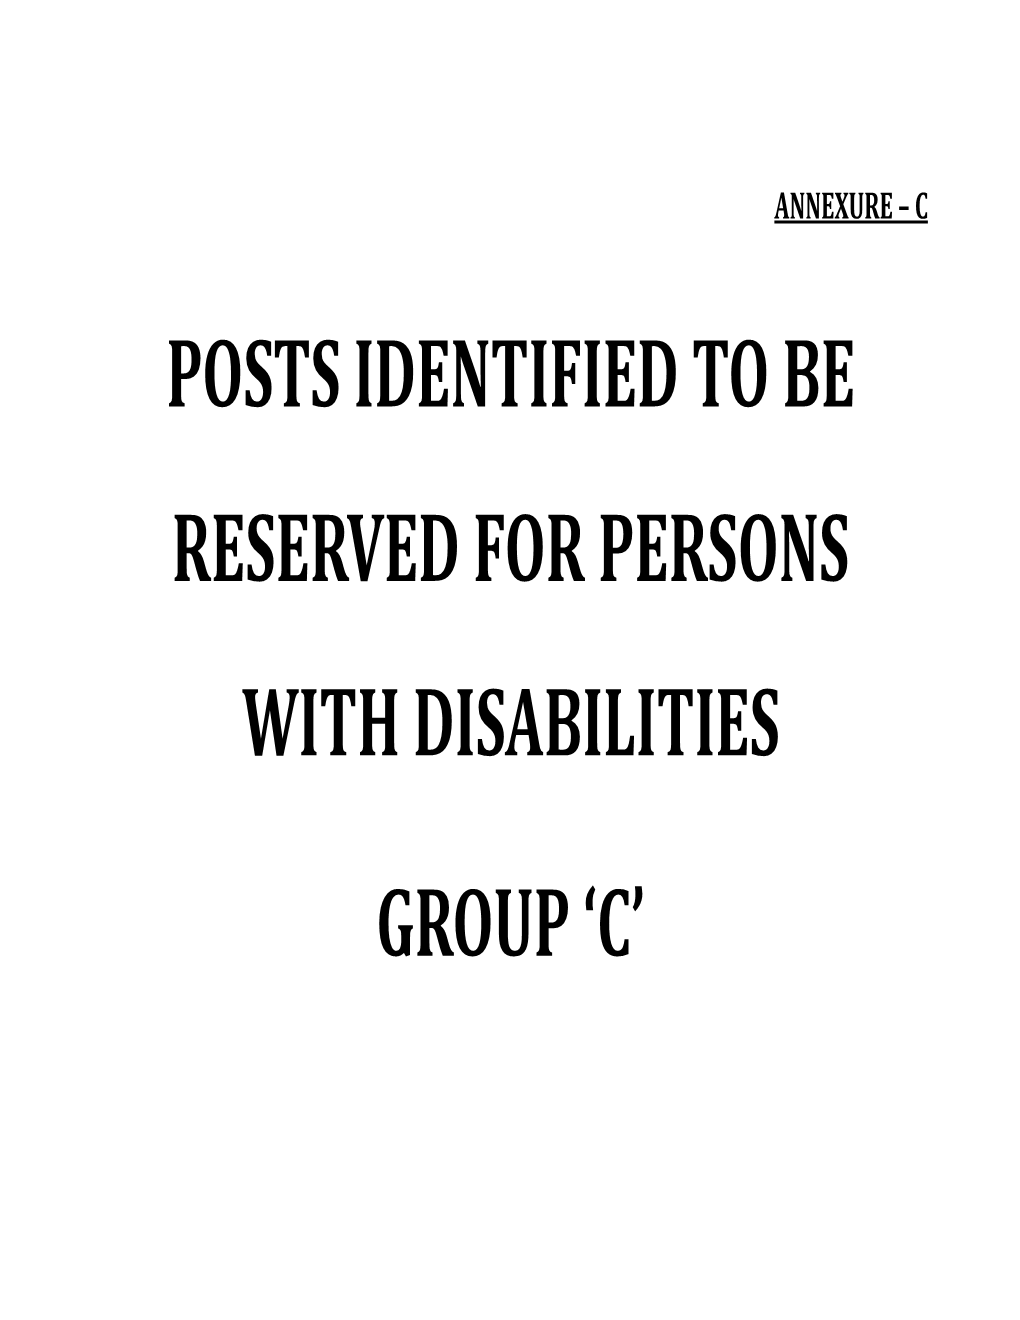 Posts Identified to Be Reserved for Persons with Disabilities Group C